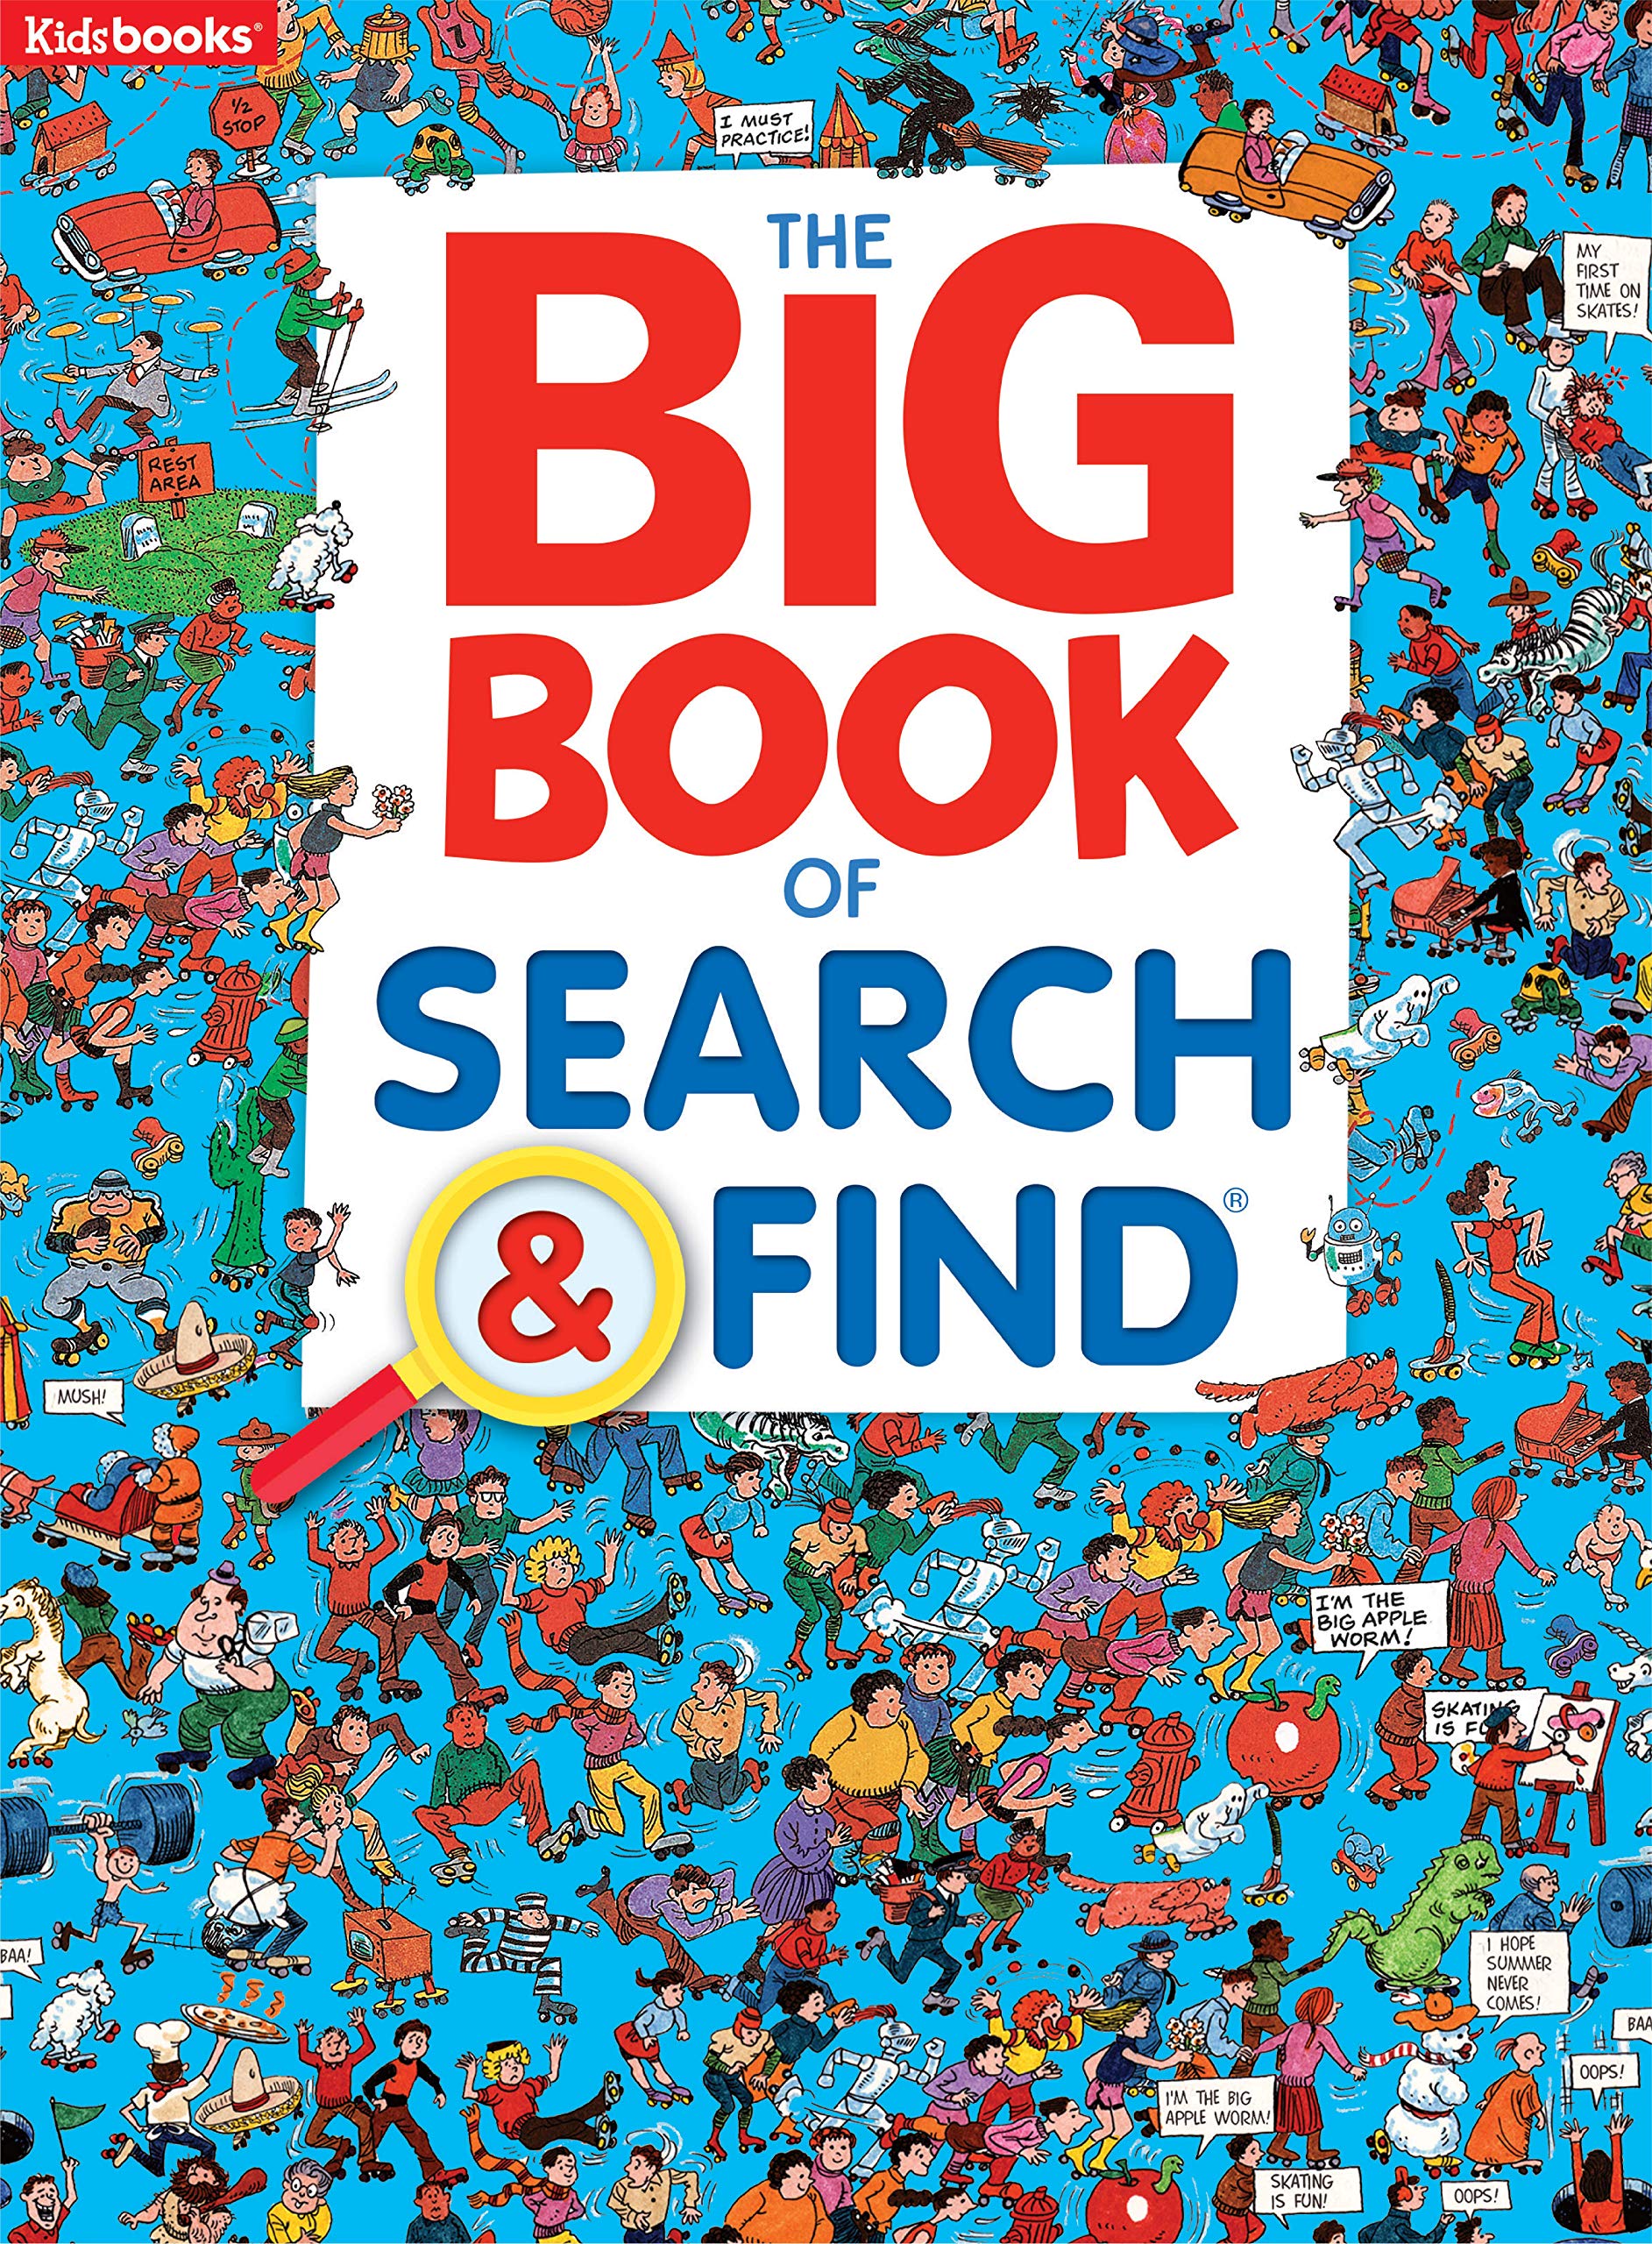 Big Book of Search & Find by Kidsbooks